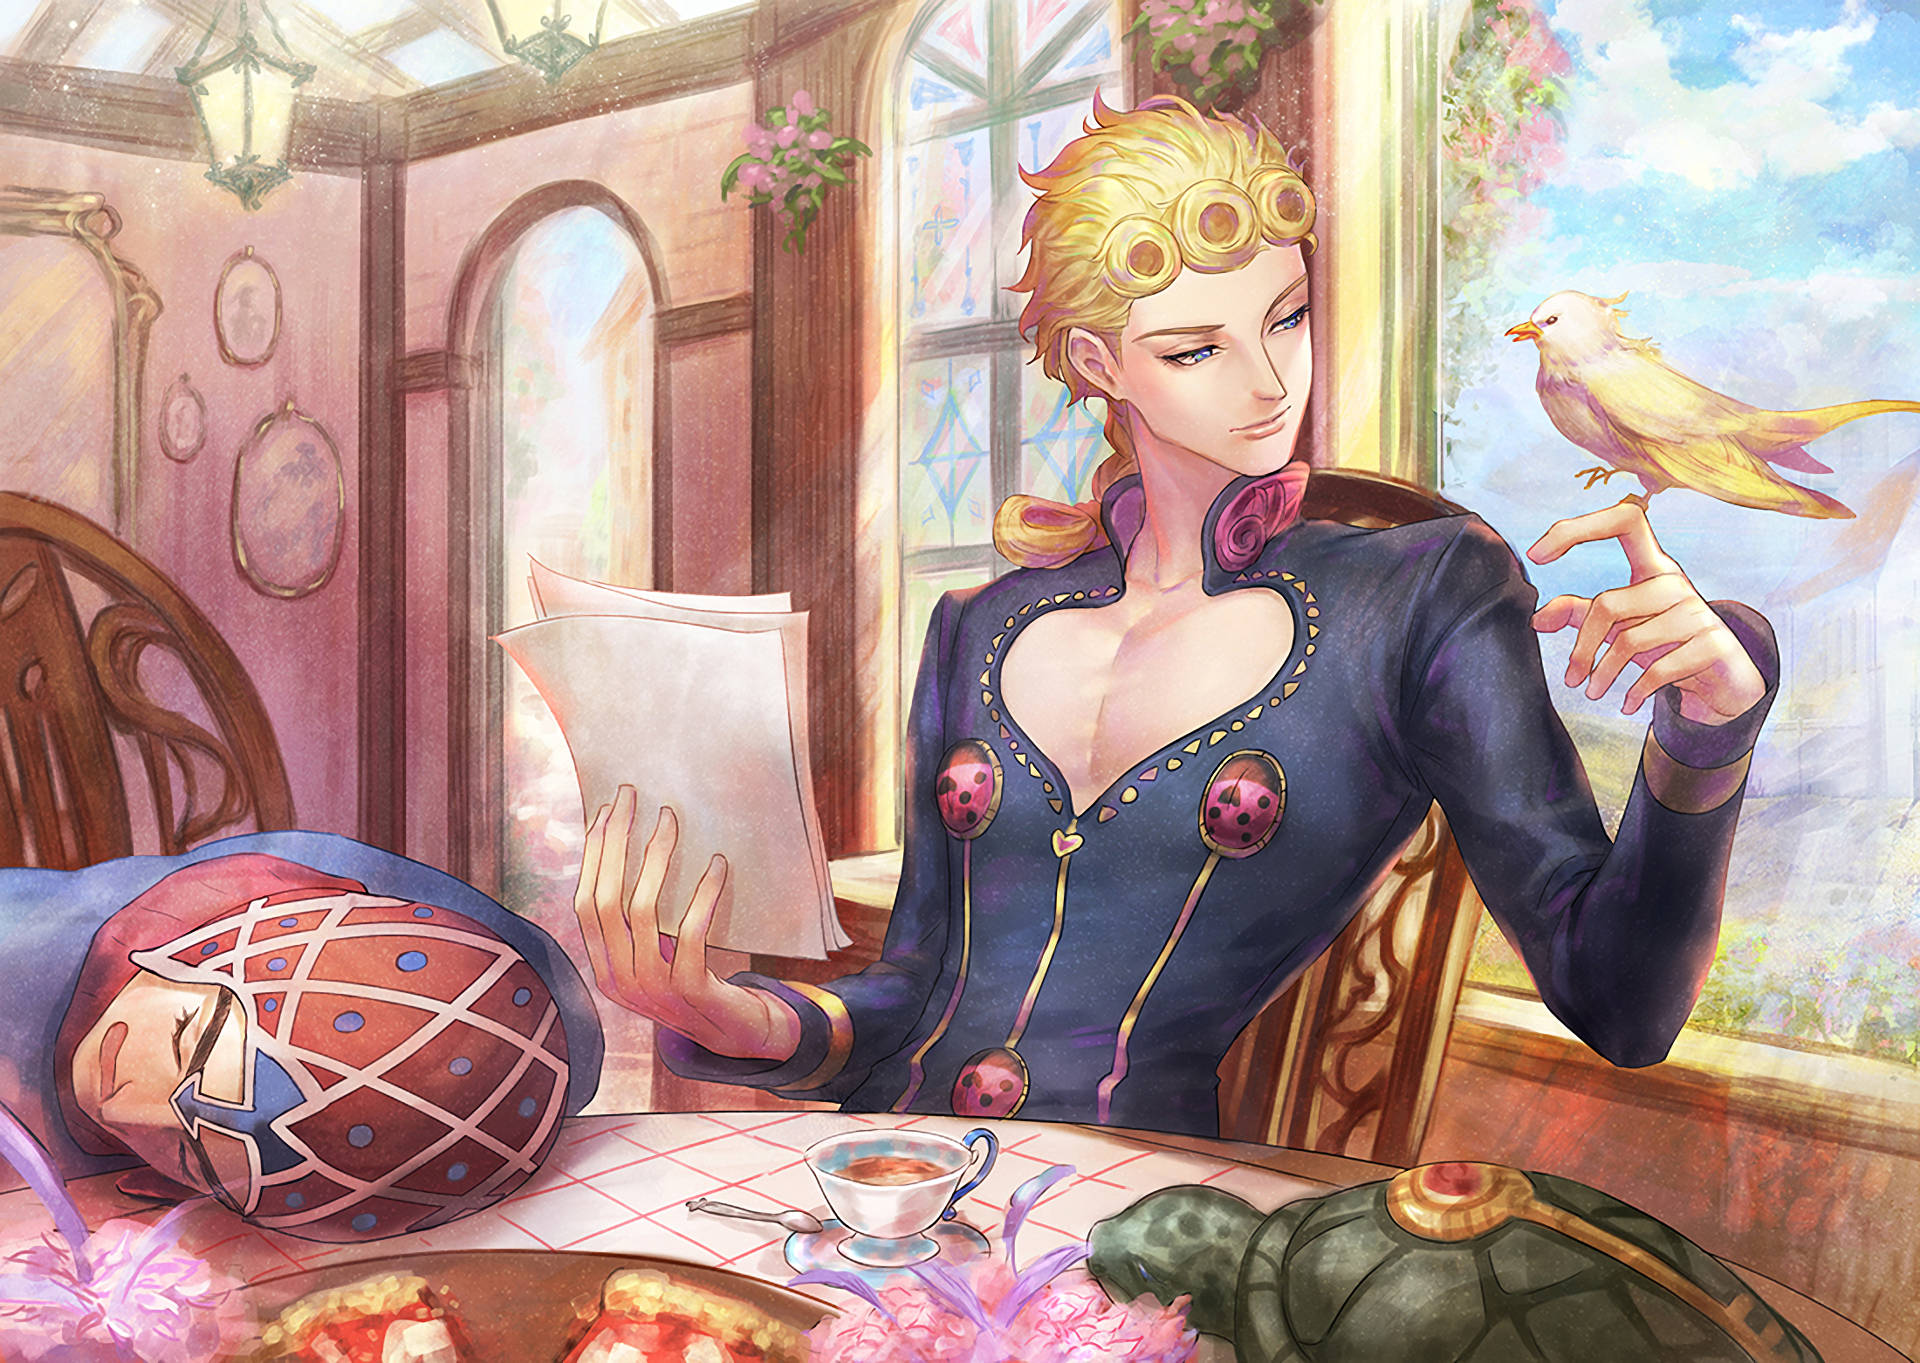 Giorno Giovanna and the rest of the Passione gang are ready for a new adventure. Wallpaper